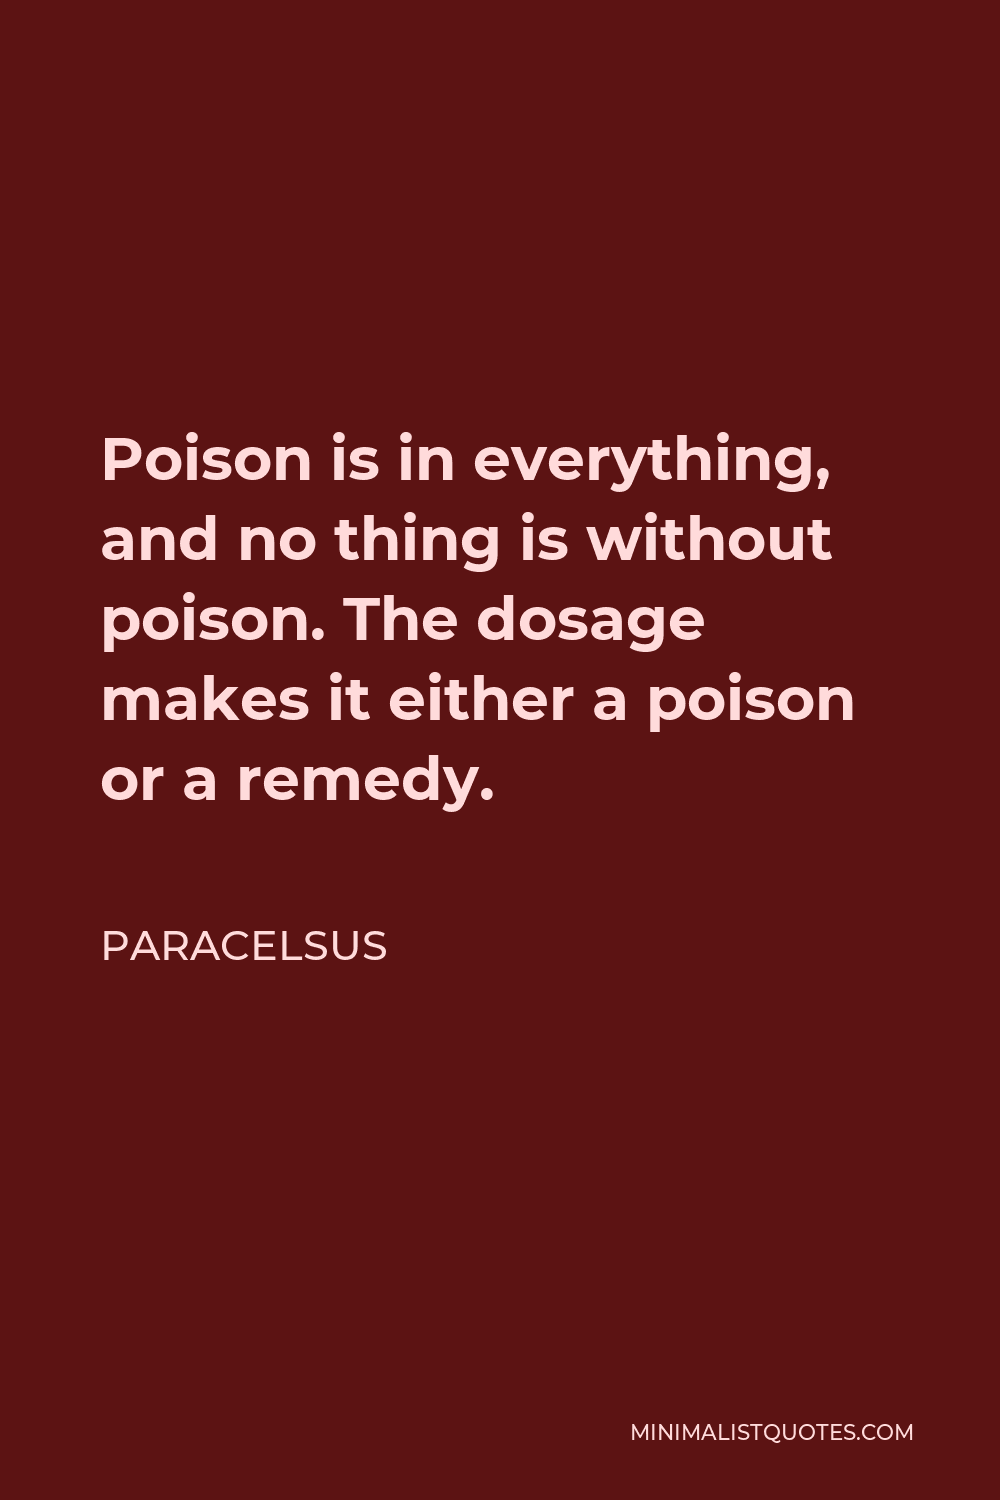 Paracelsus Quote - Poison is in everything, and no thing is without poison. The dosage makes it either a poison or a remedy.